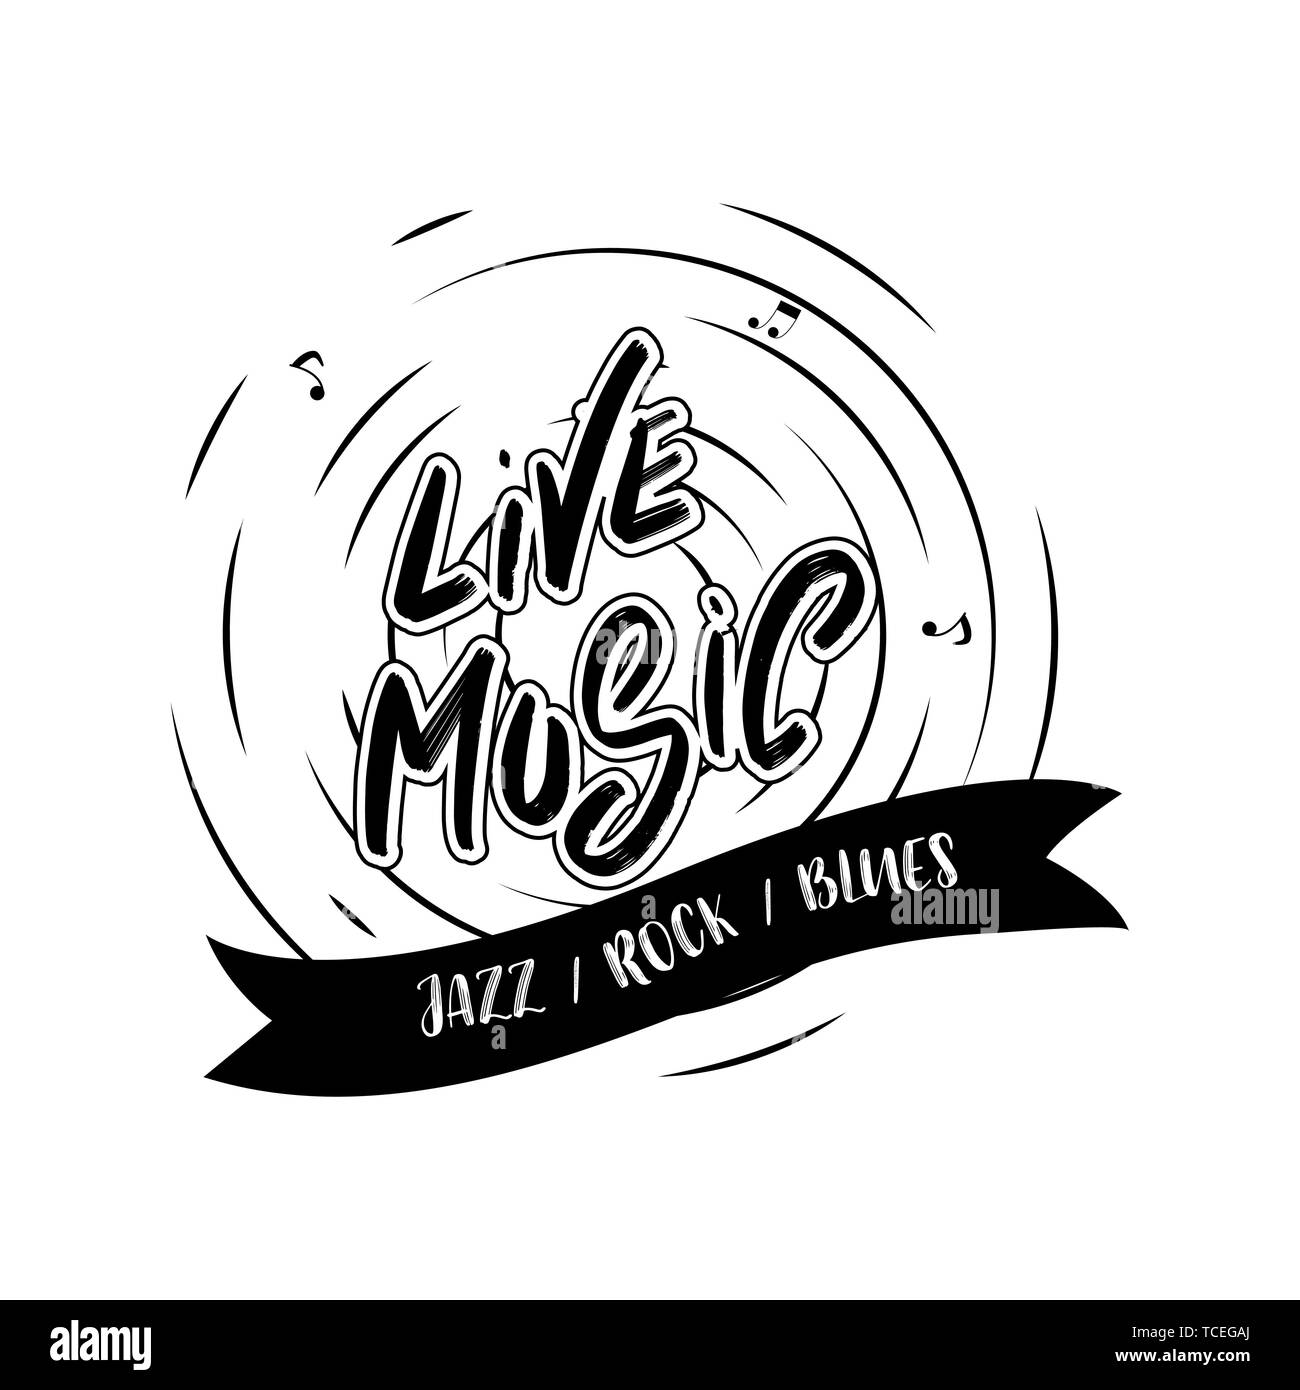 Jazz music festival poster with lettering 'Live Music'. International Jazz Day. Vector hand drawn illustration. Stock Vector